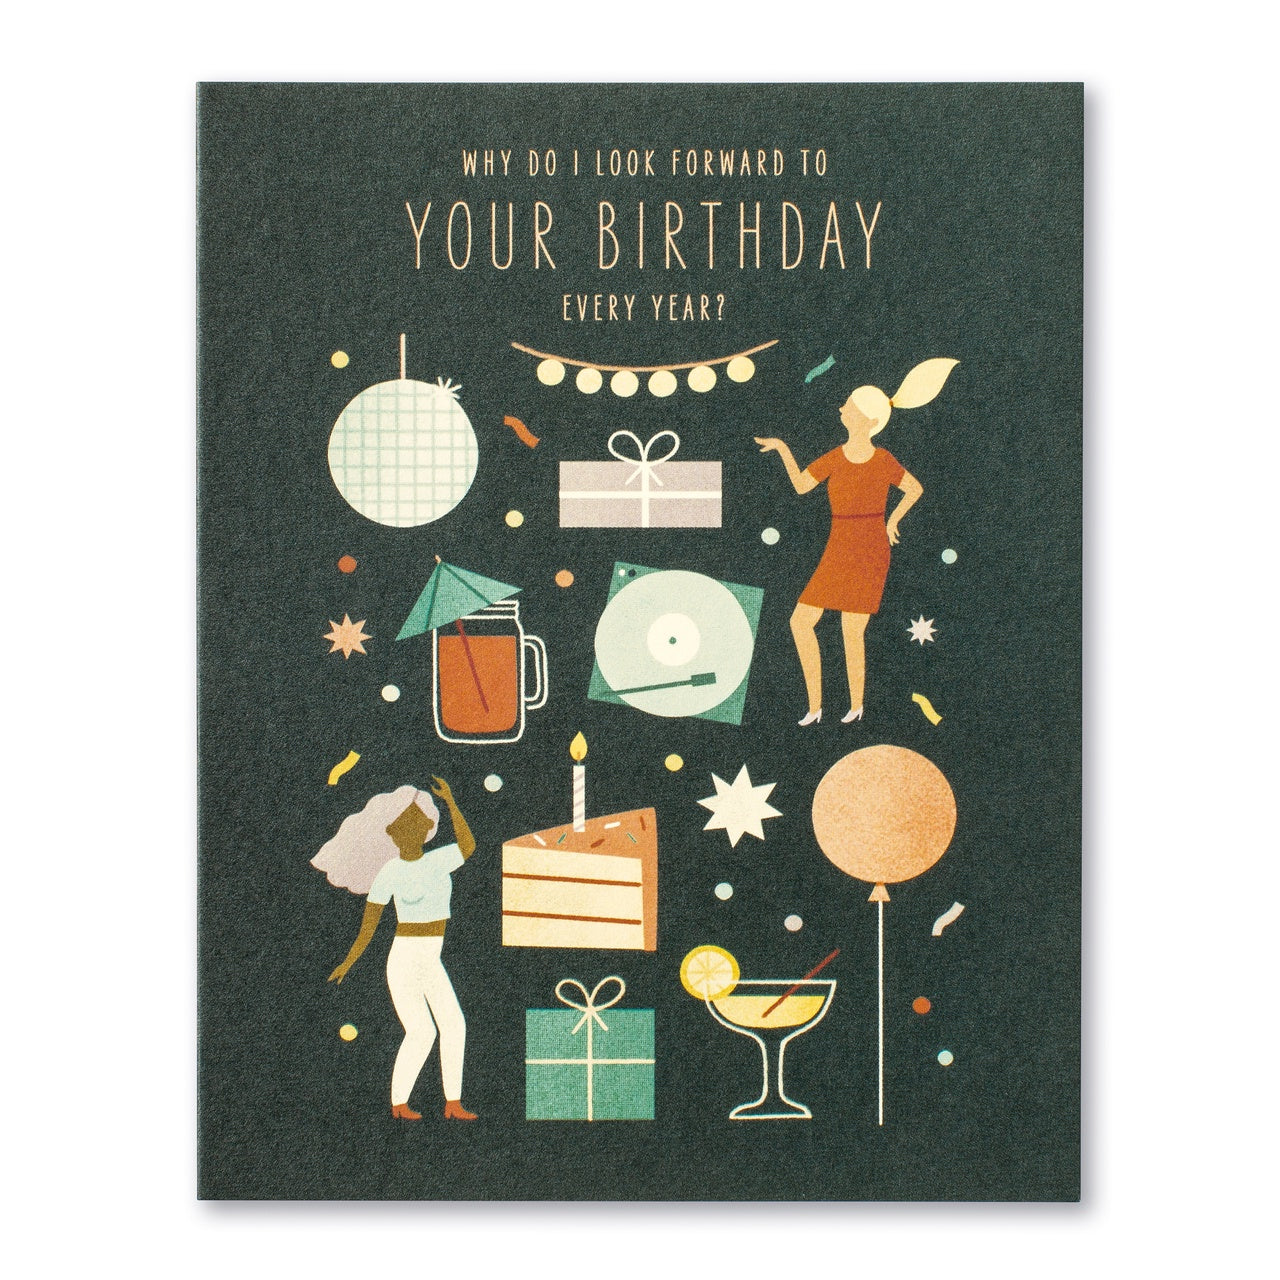 Why Do I Look Forward to Your Birthday Every Year? Card 07559